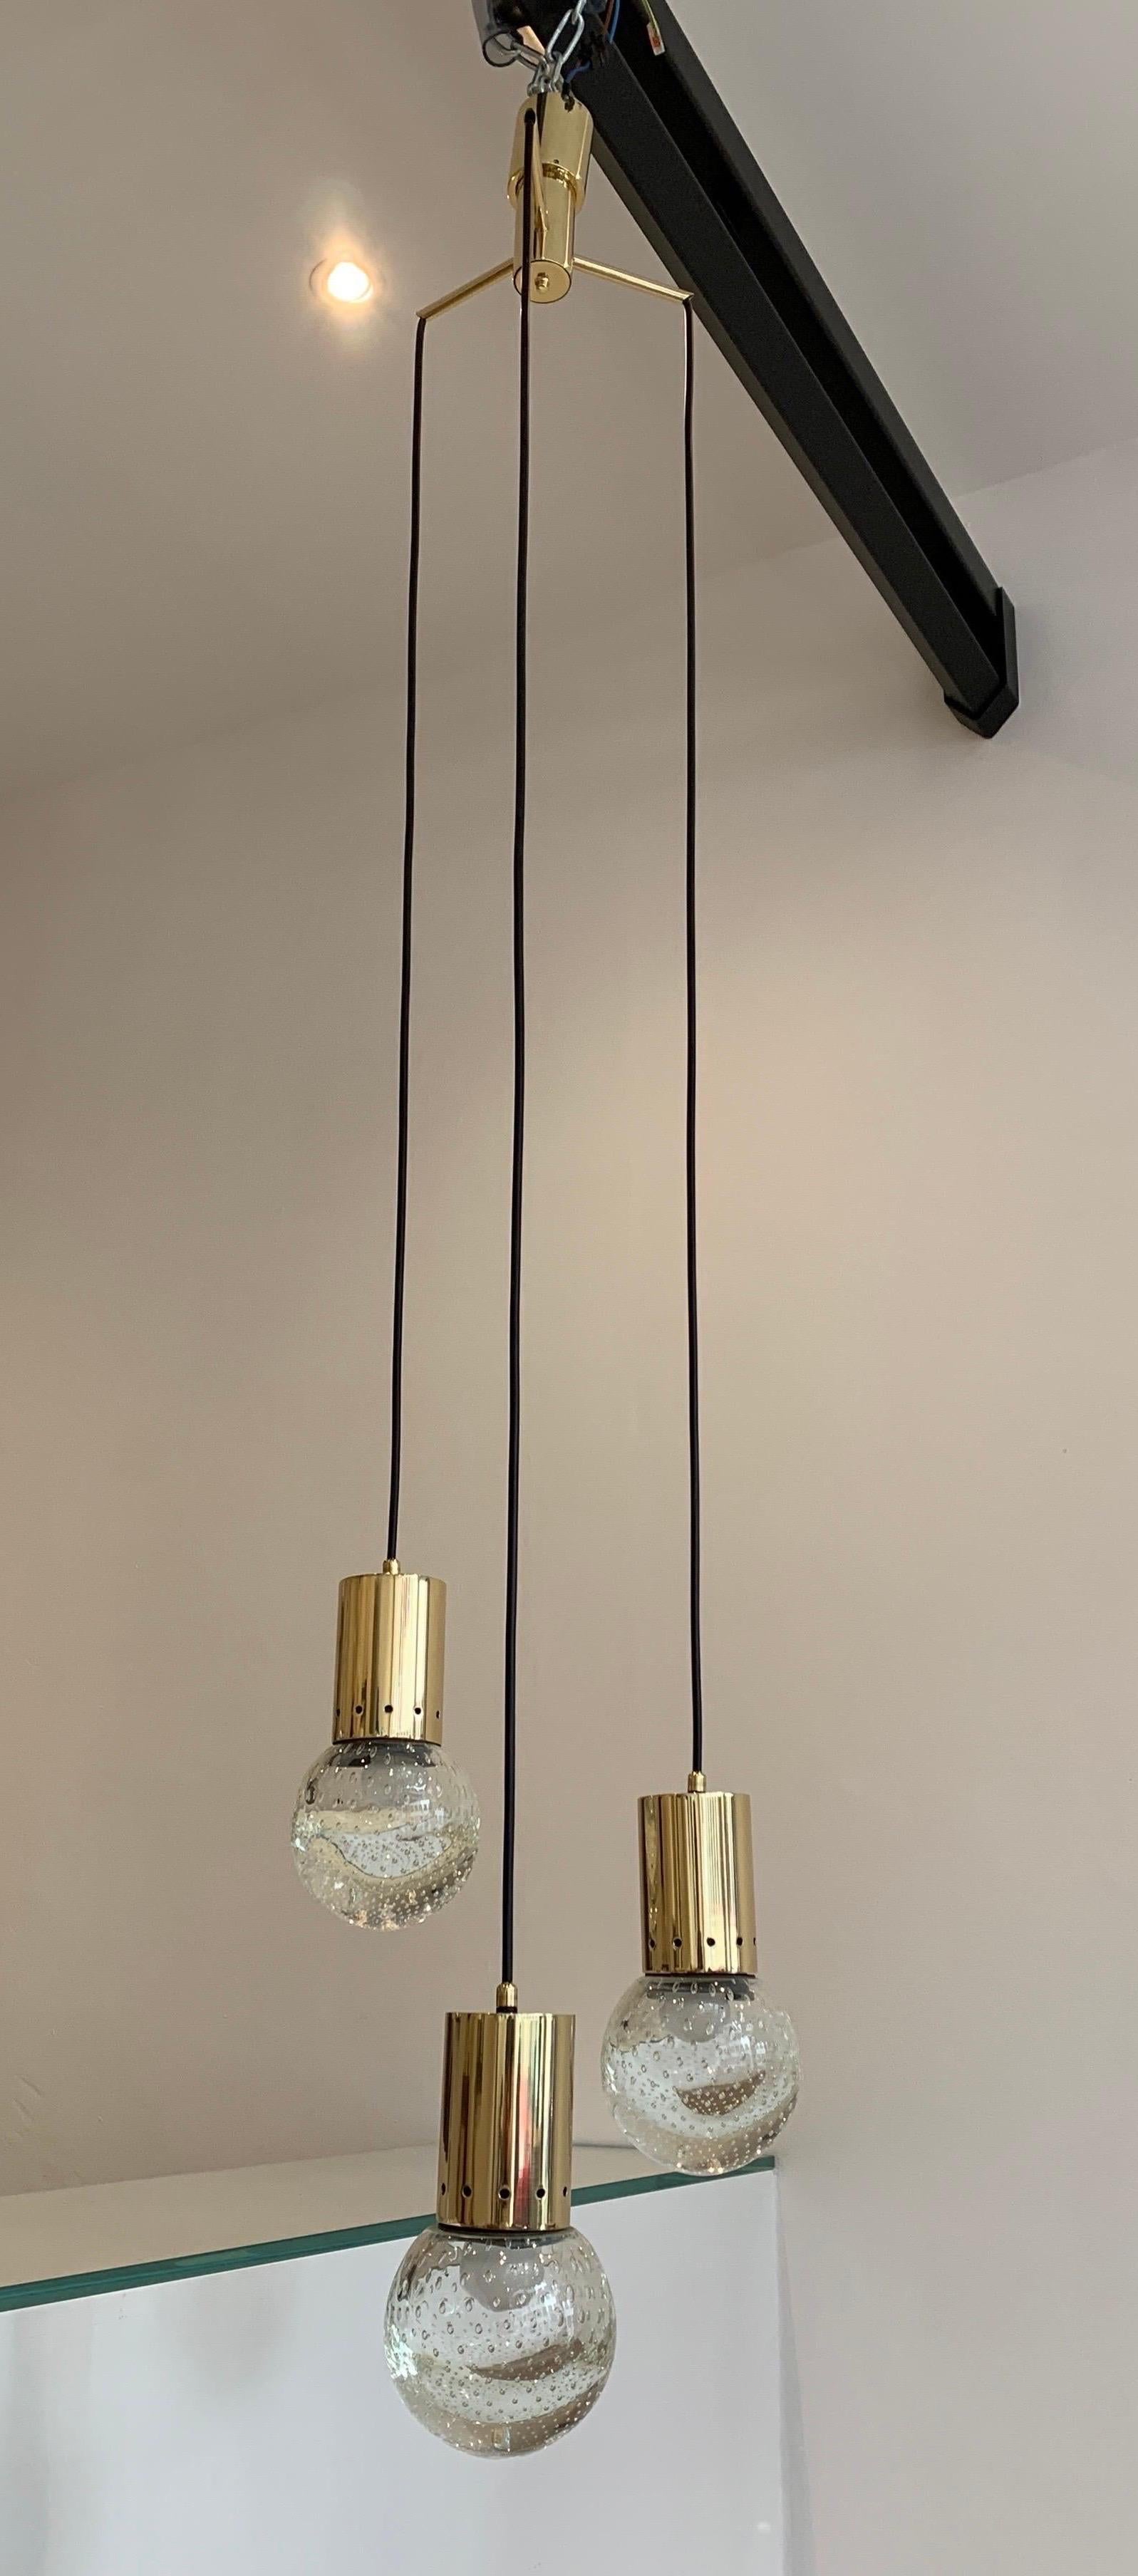 The pendant is designed by Gino Sarfatti. He was one of the most avant-gardiste light designer in the twentieth century in Italy. The pendant combines his design with glass spheres decorated with internal bubbles. The spheres were realized by Seguso